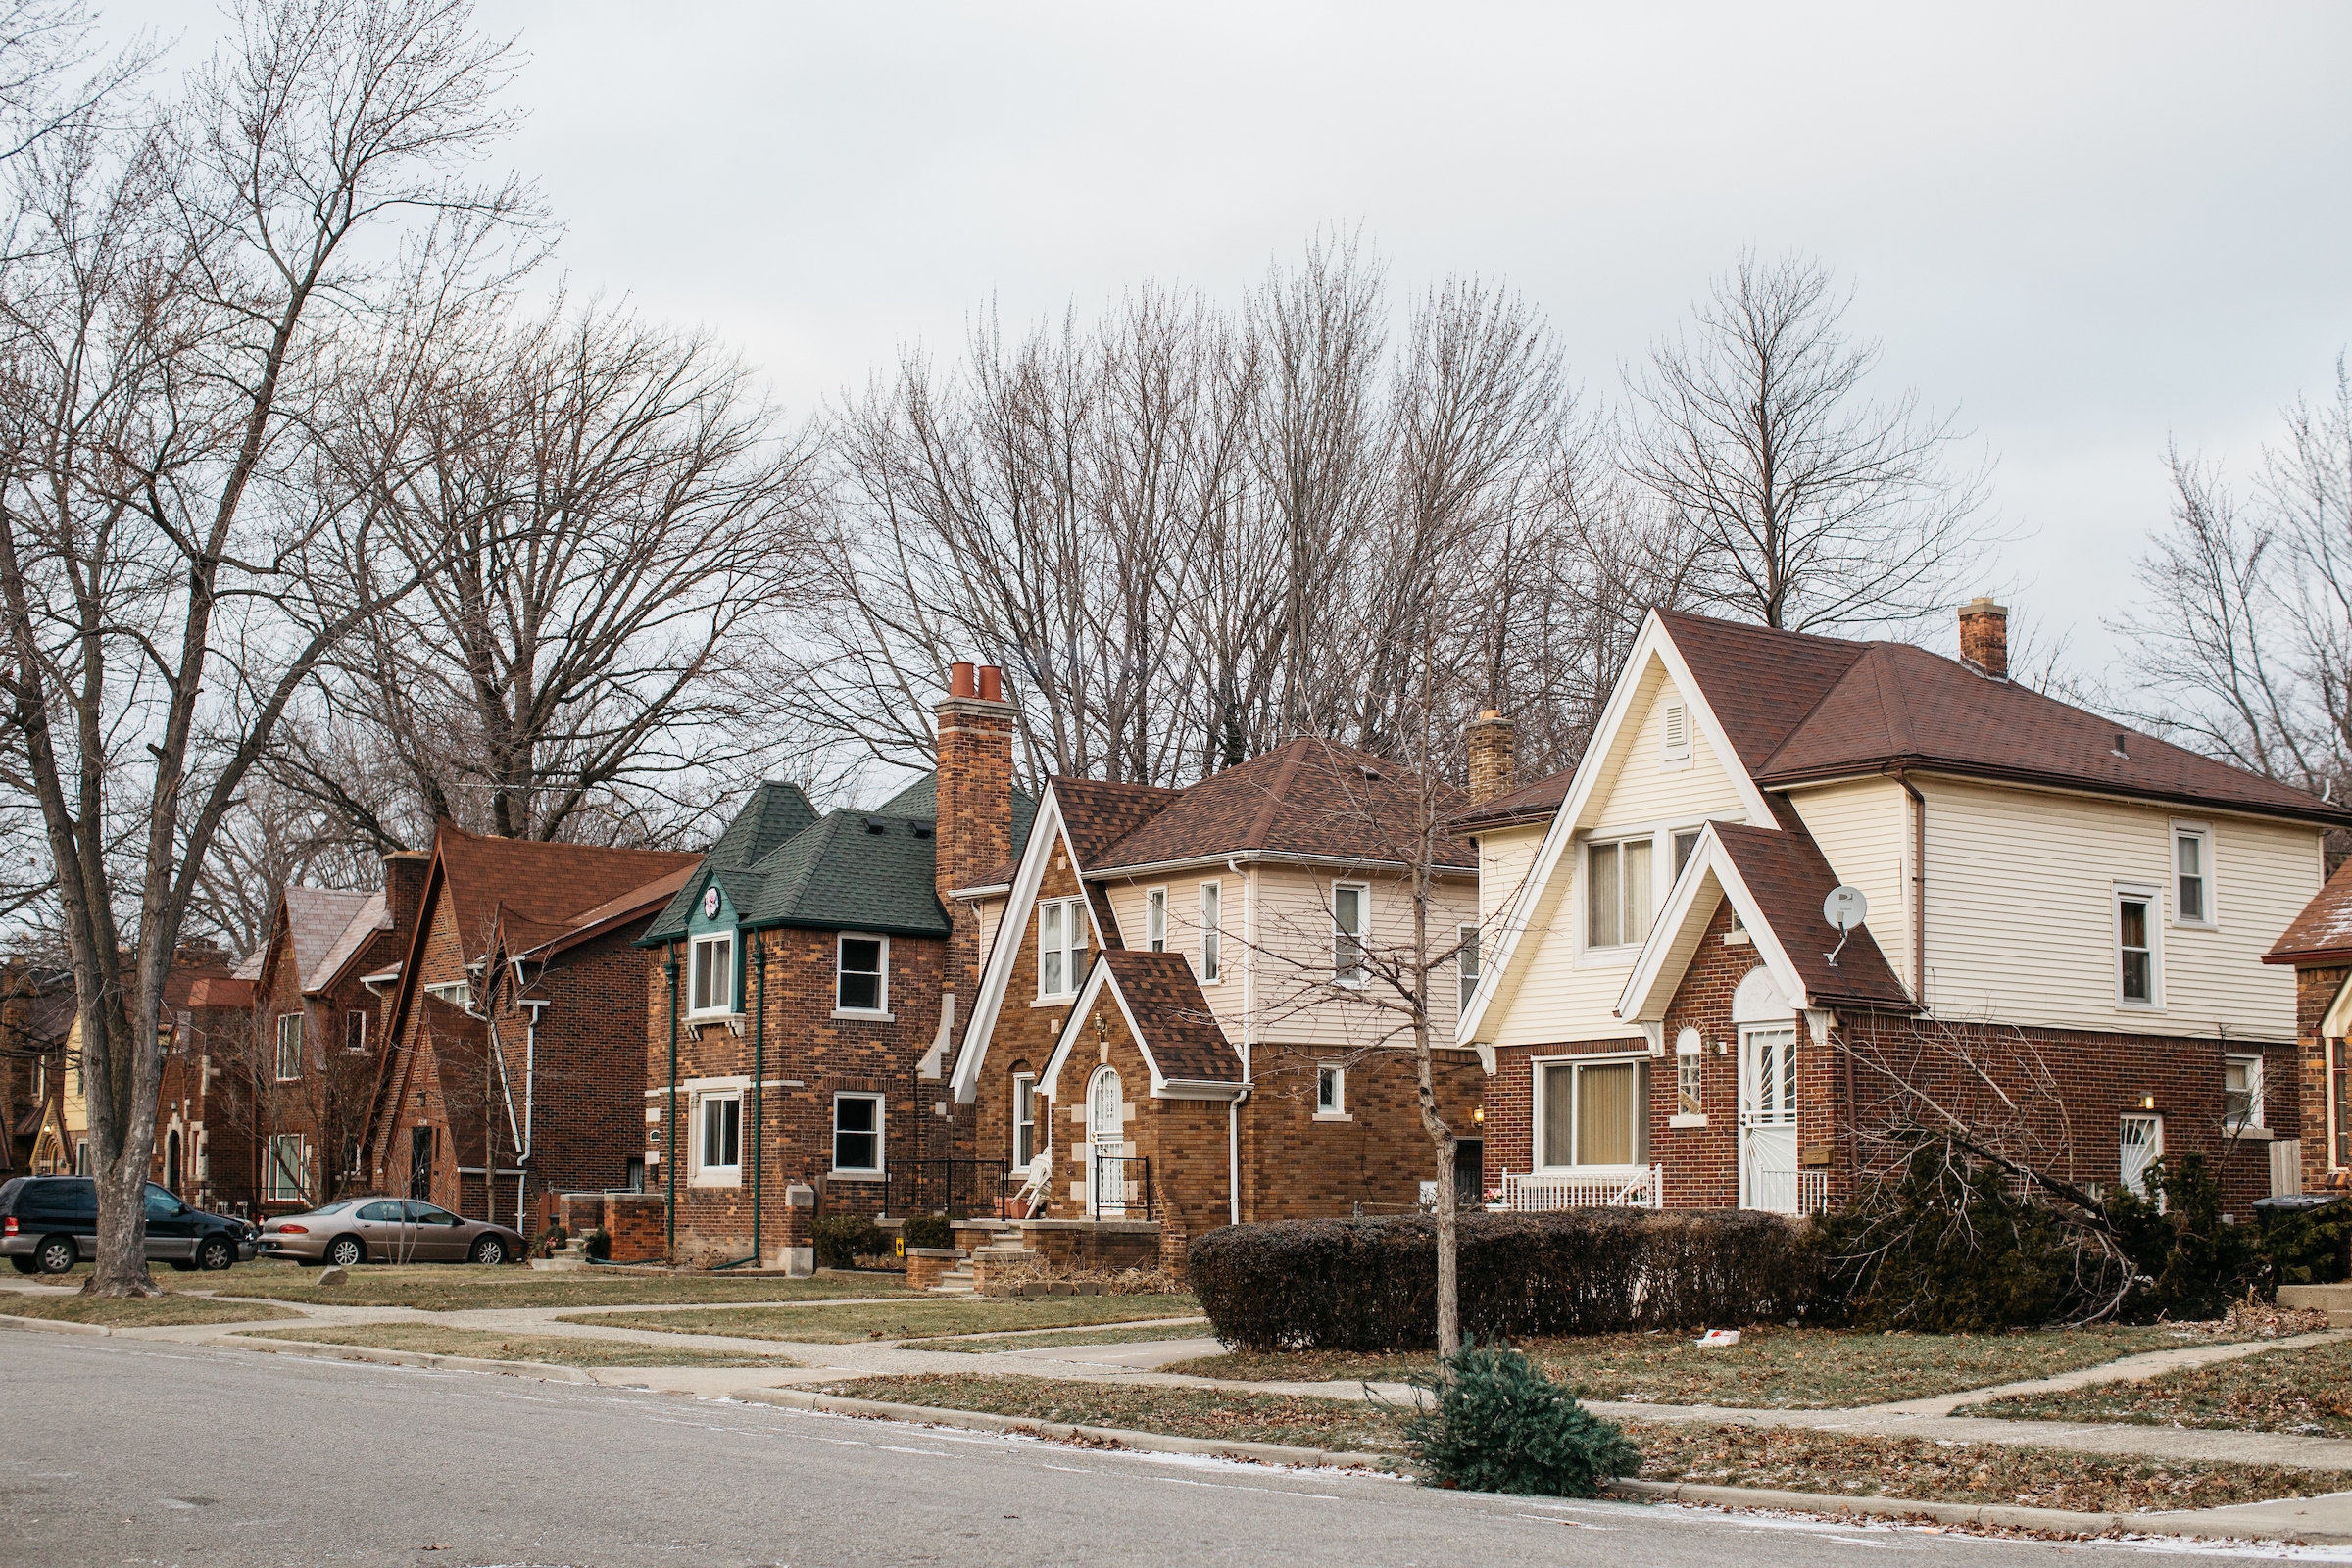 Neighborhood street in Detroit, single family homes, mostly brick and white. Trees in winter have lost their leaves.